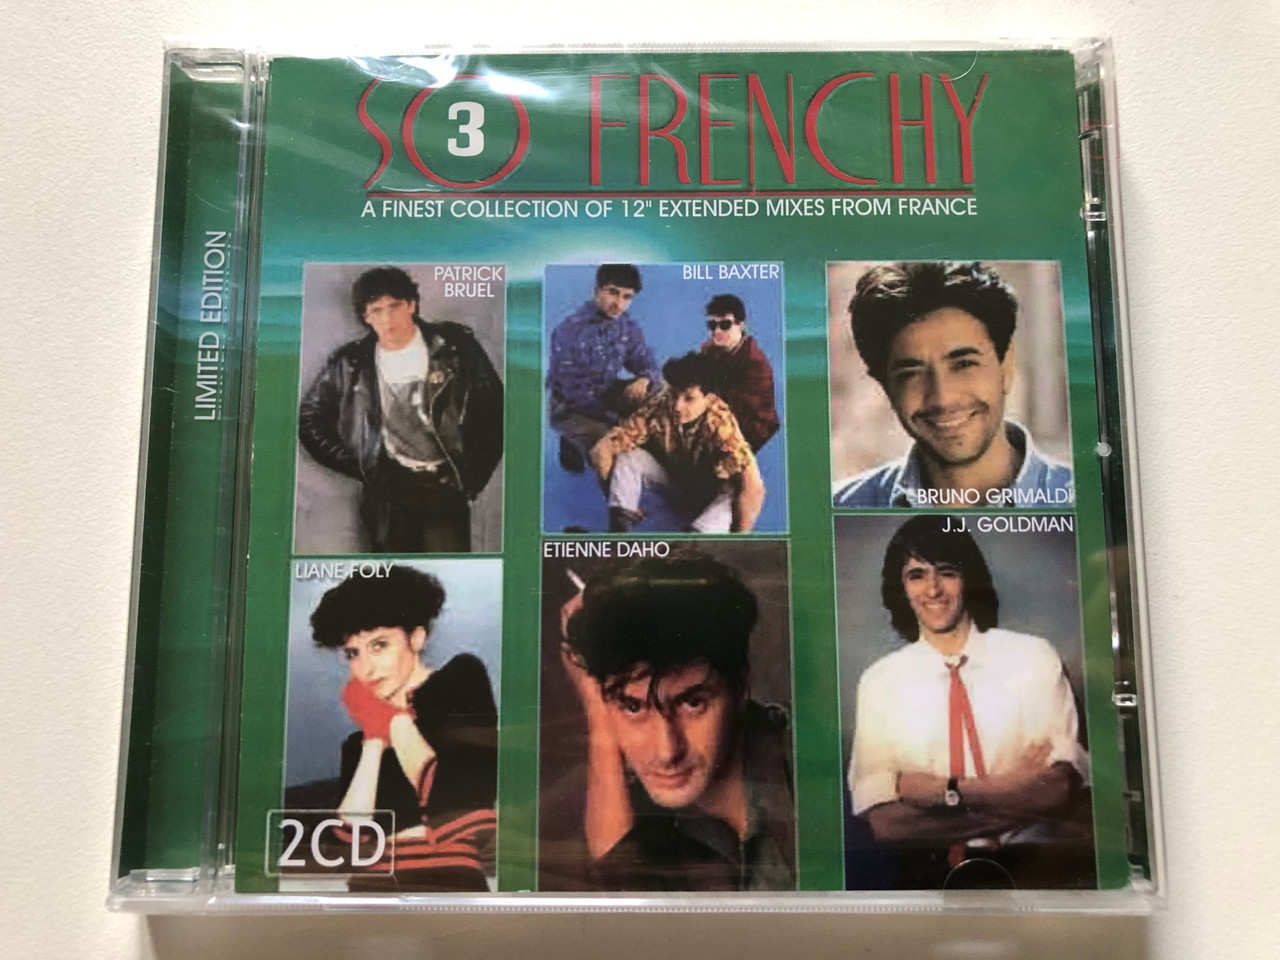 https://cdn10.bigcommerce.com/s-62bdpkt7pb/products/0/images/312668/So_Frenchy_3_-_A_Finest_Collection_Of_12_Extended_Mixes_From_France_Patrick_Bruel_Bill_Baxter_Bruno_Grimaldi_Liane_Foly_Etienne_Daho_J._J._Goldman_Limited_Edition_Arcana_Music_Ltd_2x_1__43437.1700074836.1280.1280.JPG?c=2